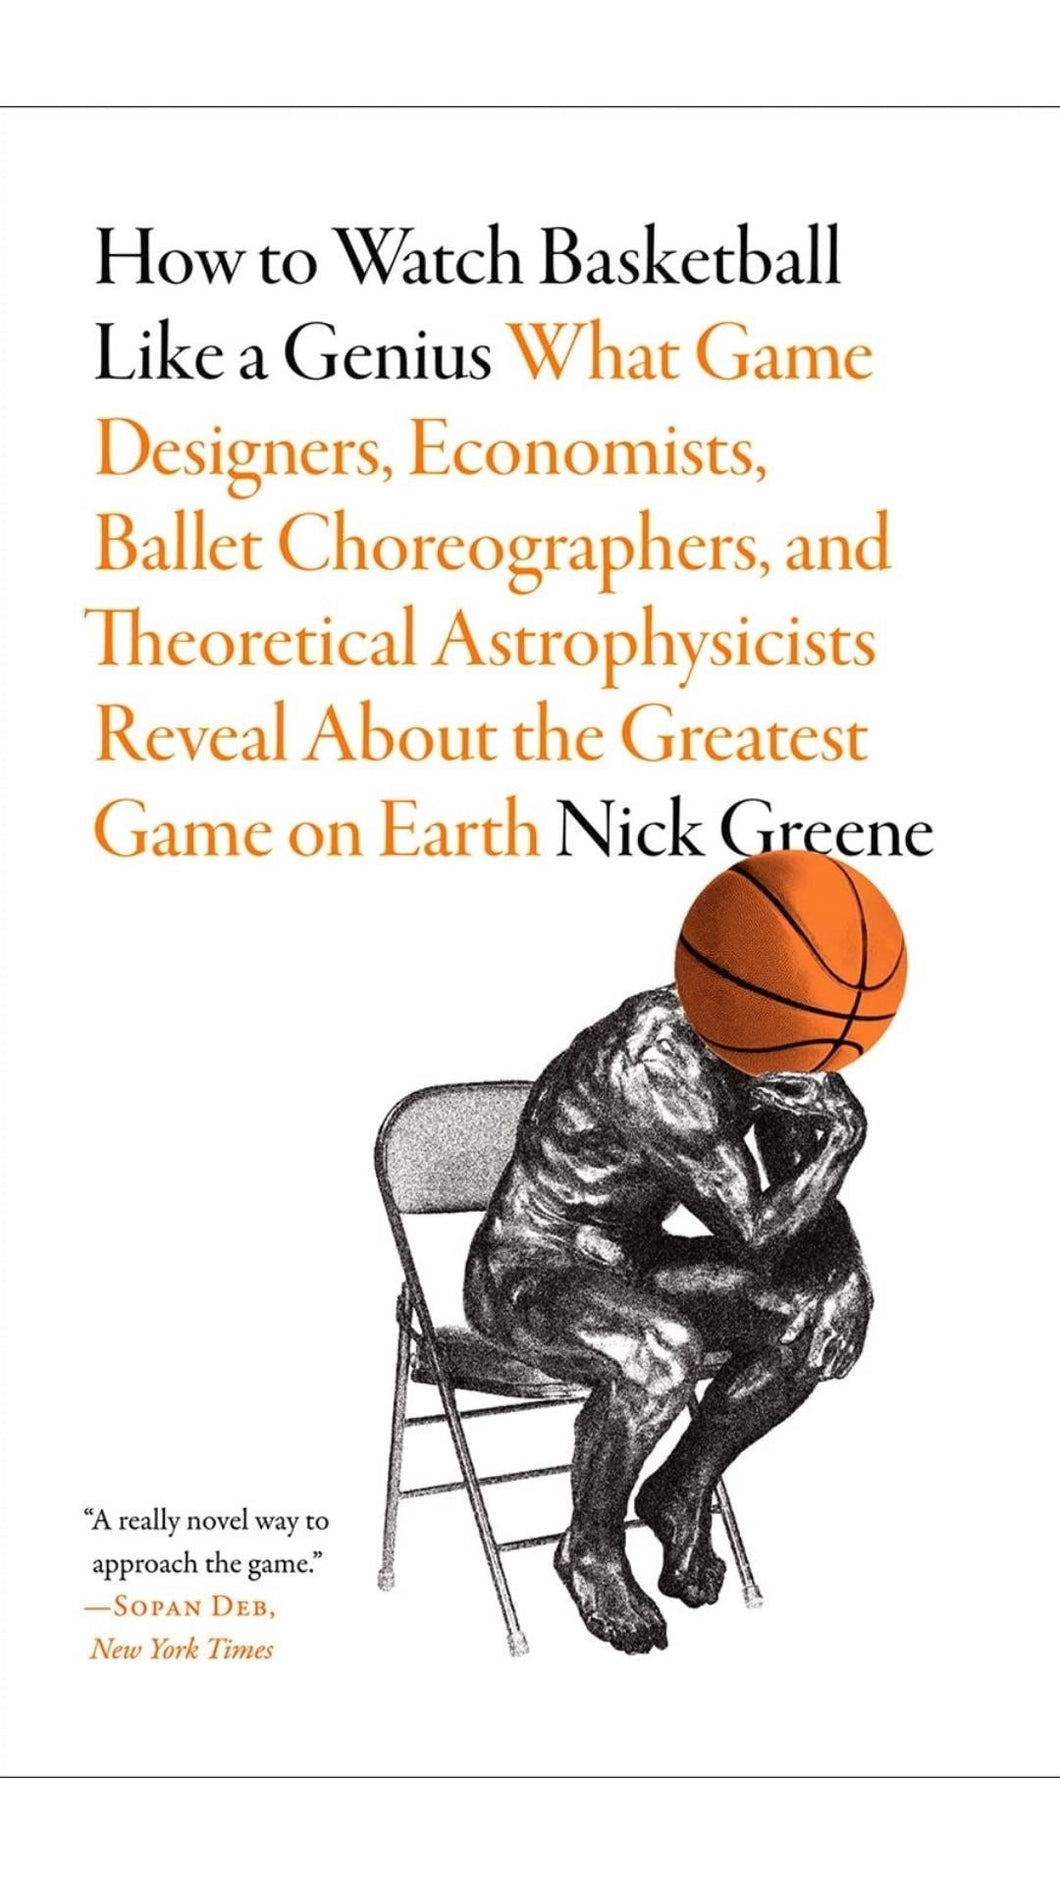 How to Watch Basketball Like a Genius Book